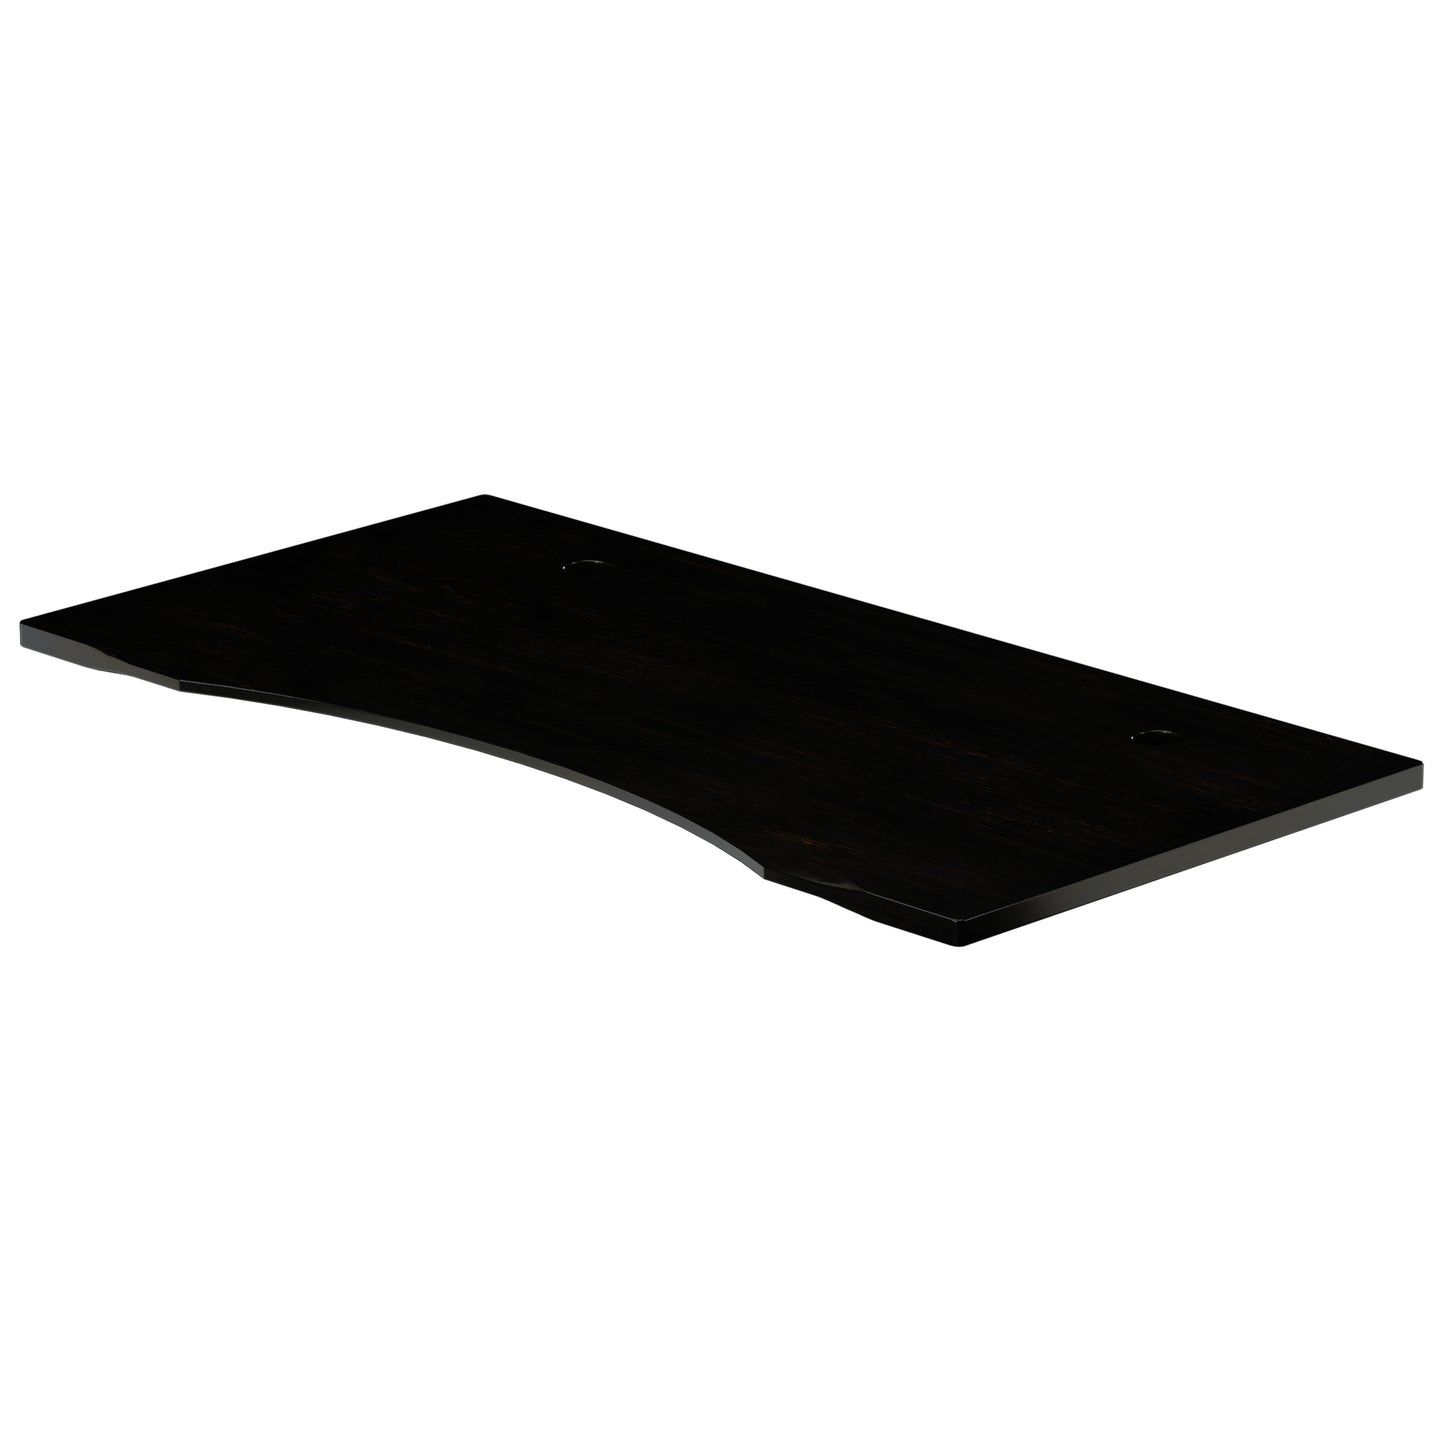 Black Bamboo Rounded Tabletop 6